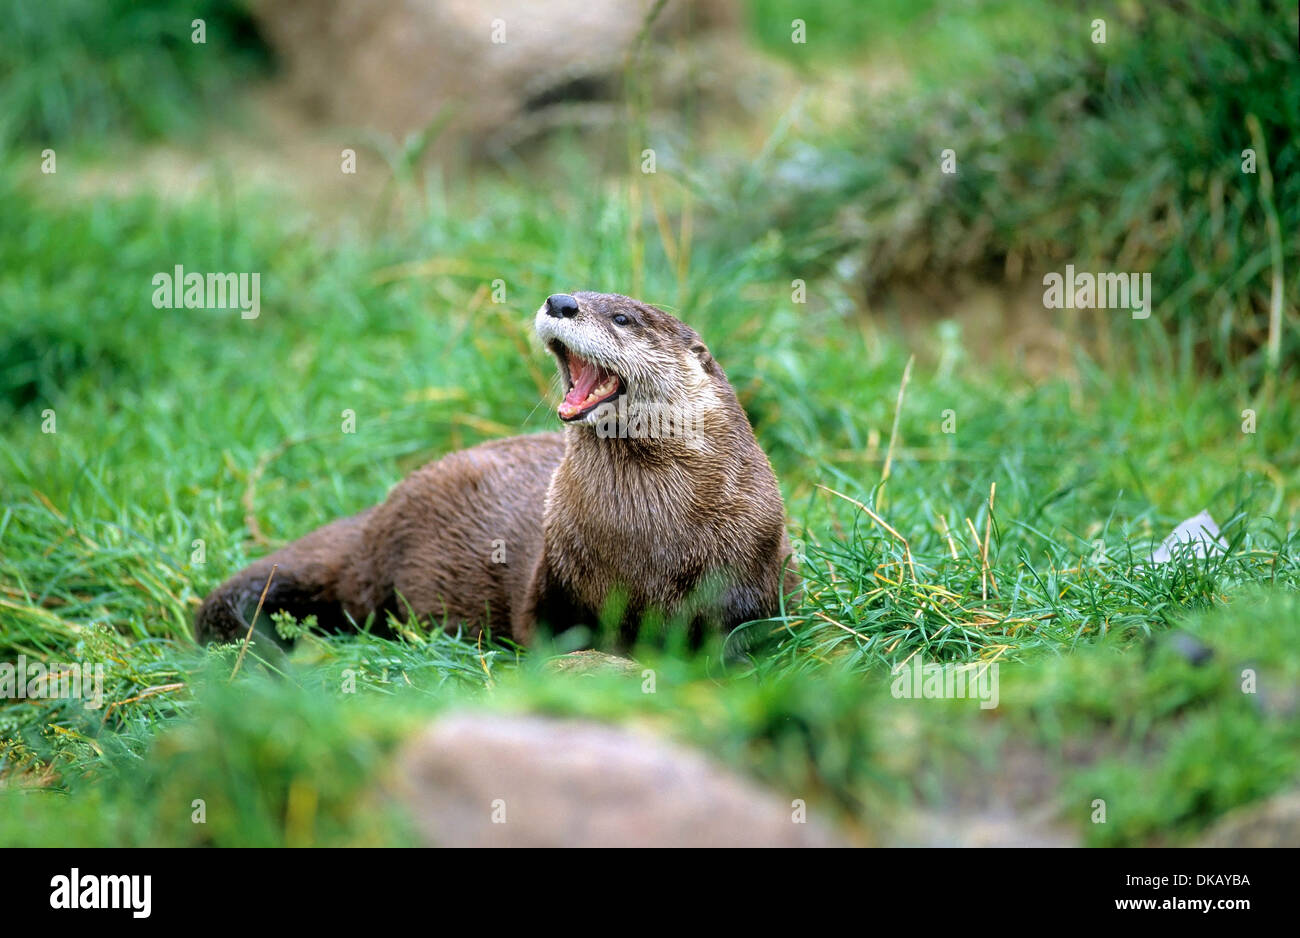 North American river otter (Lontra canadensis), northern river otter, common otter Stock Photo